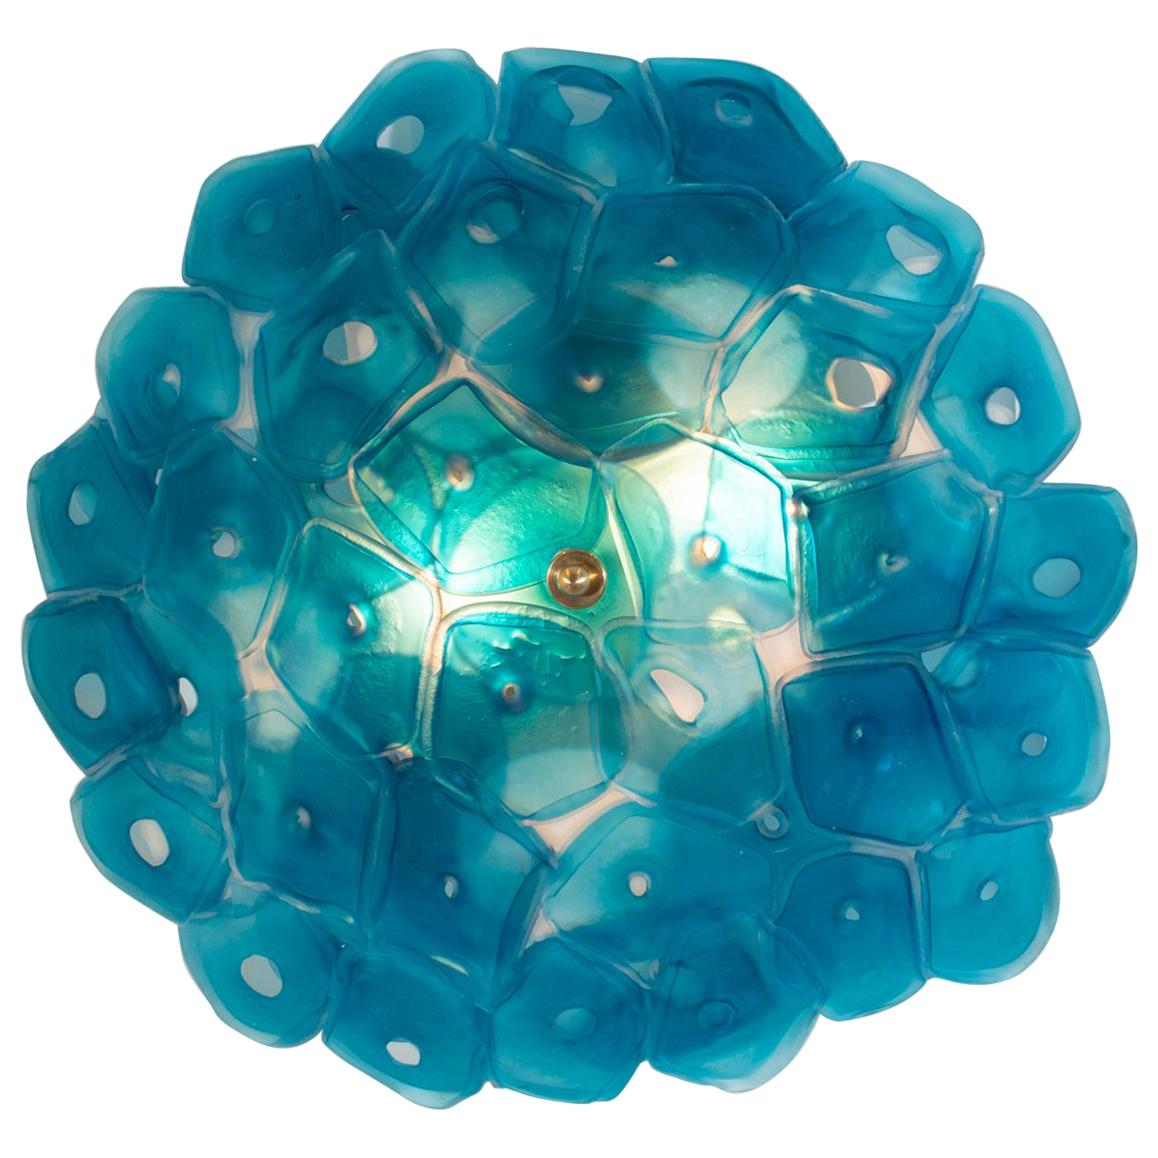 Sculptural Wall Sconce in Slumped and Fused Blue Glass by Jeff Zimmerman, 2018